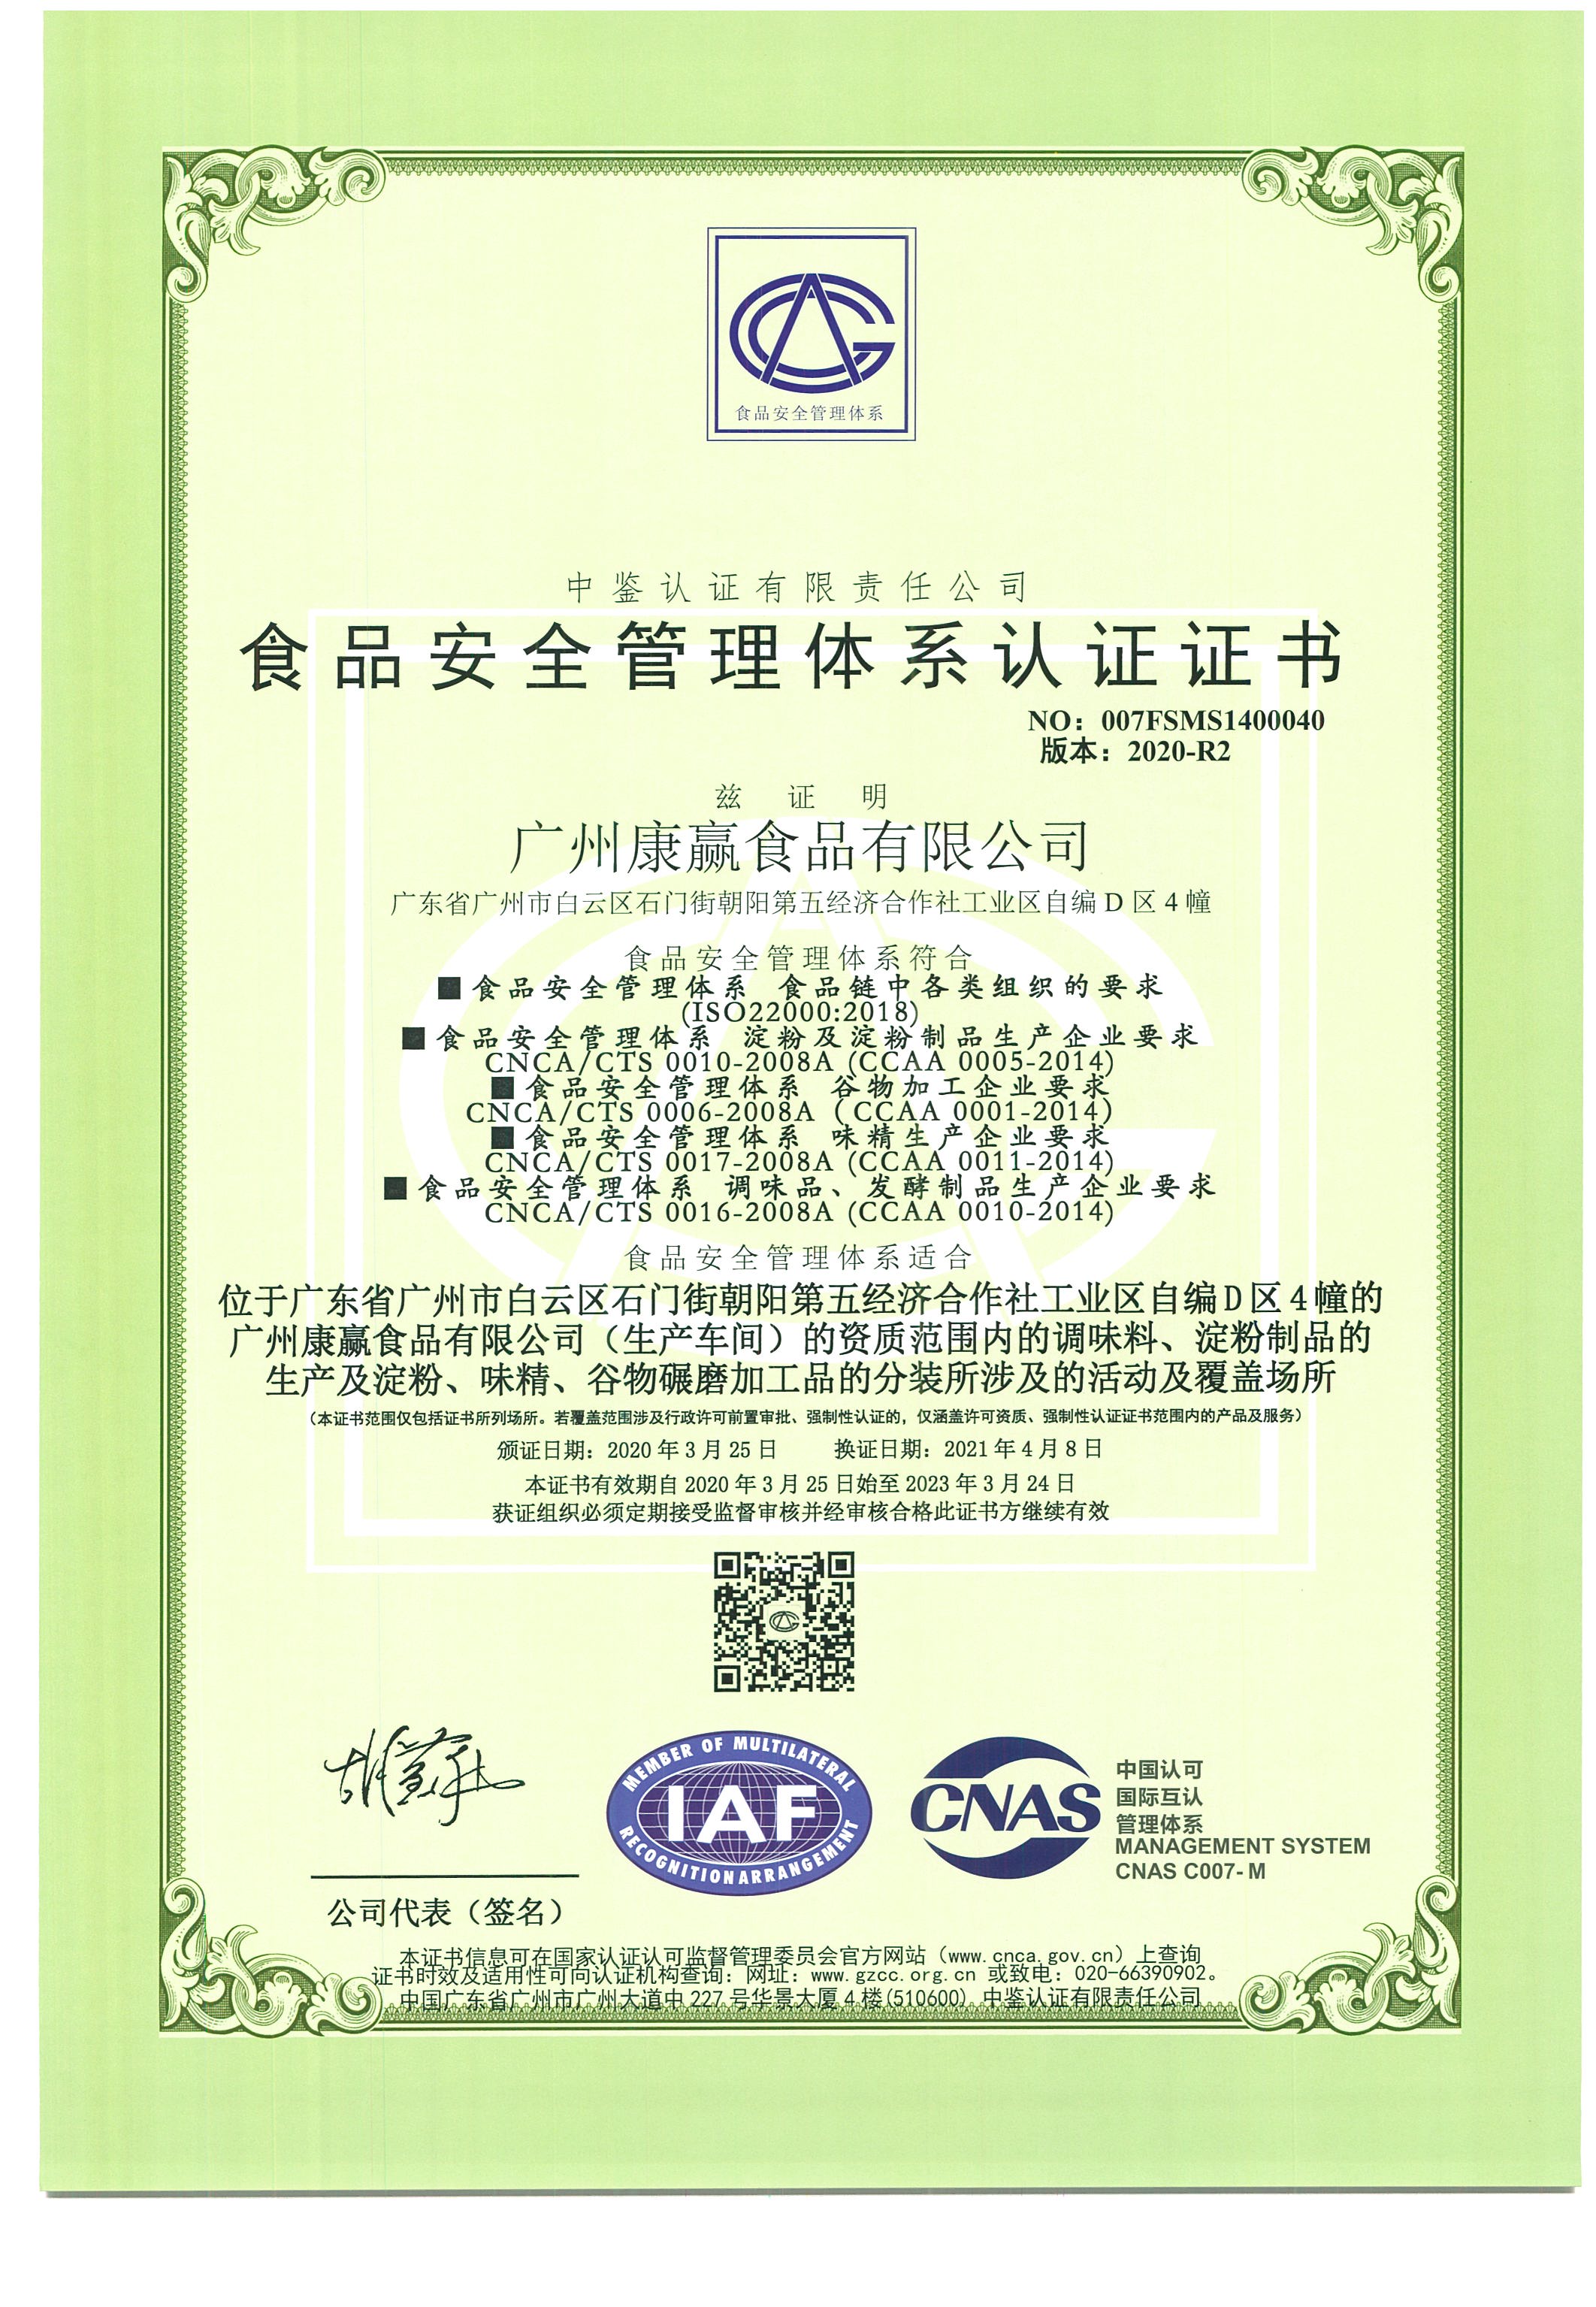 ISO:22000 (Food Safety Management System Certification)